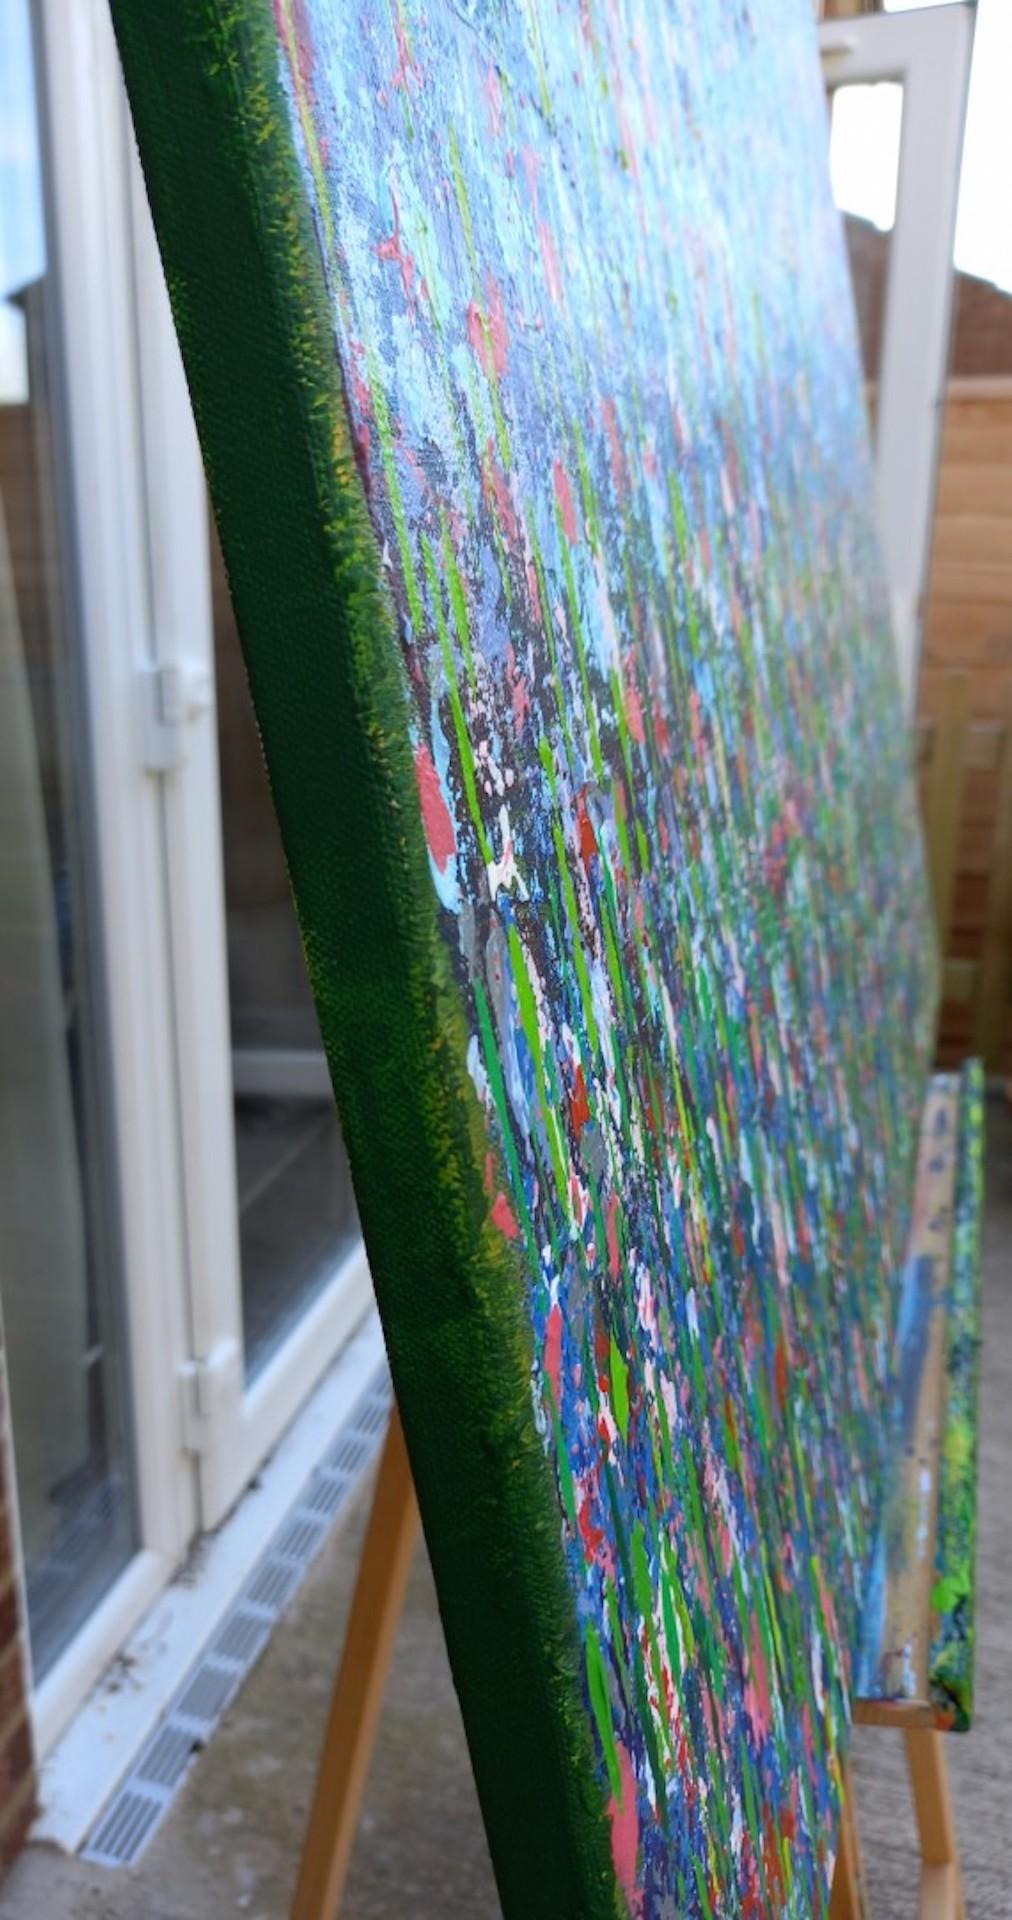 In the Garden [2021]
Original
Abstract
Acrylic on canvas
Complete Size of Unframed Work: H:76 cm x W:101 cm x D:1cm
Sold Unframed
Please note that insitu images are purely an indication of how a piece may look

In the Garden is an original painting